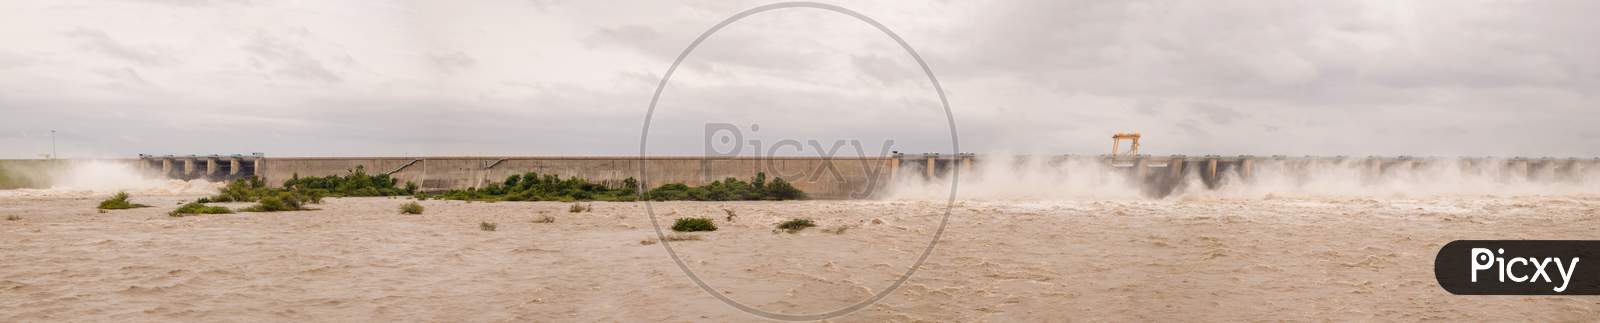 Panoramic Image Of Water Filled In Dam Due To Heavy Rain And The Gates Of The Reservior Is Opened To Release The Wtarer From The Reservoir Or Dam.